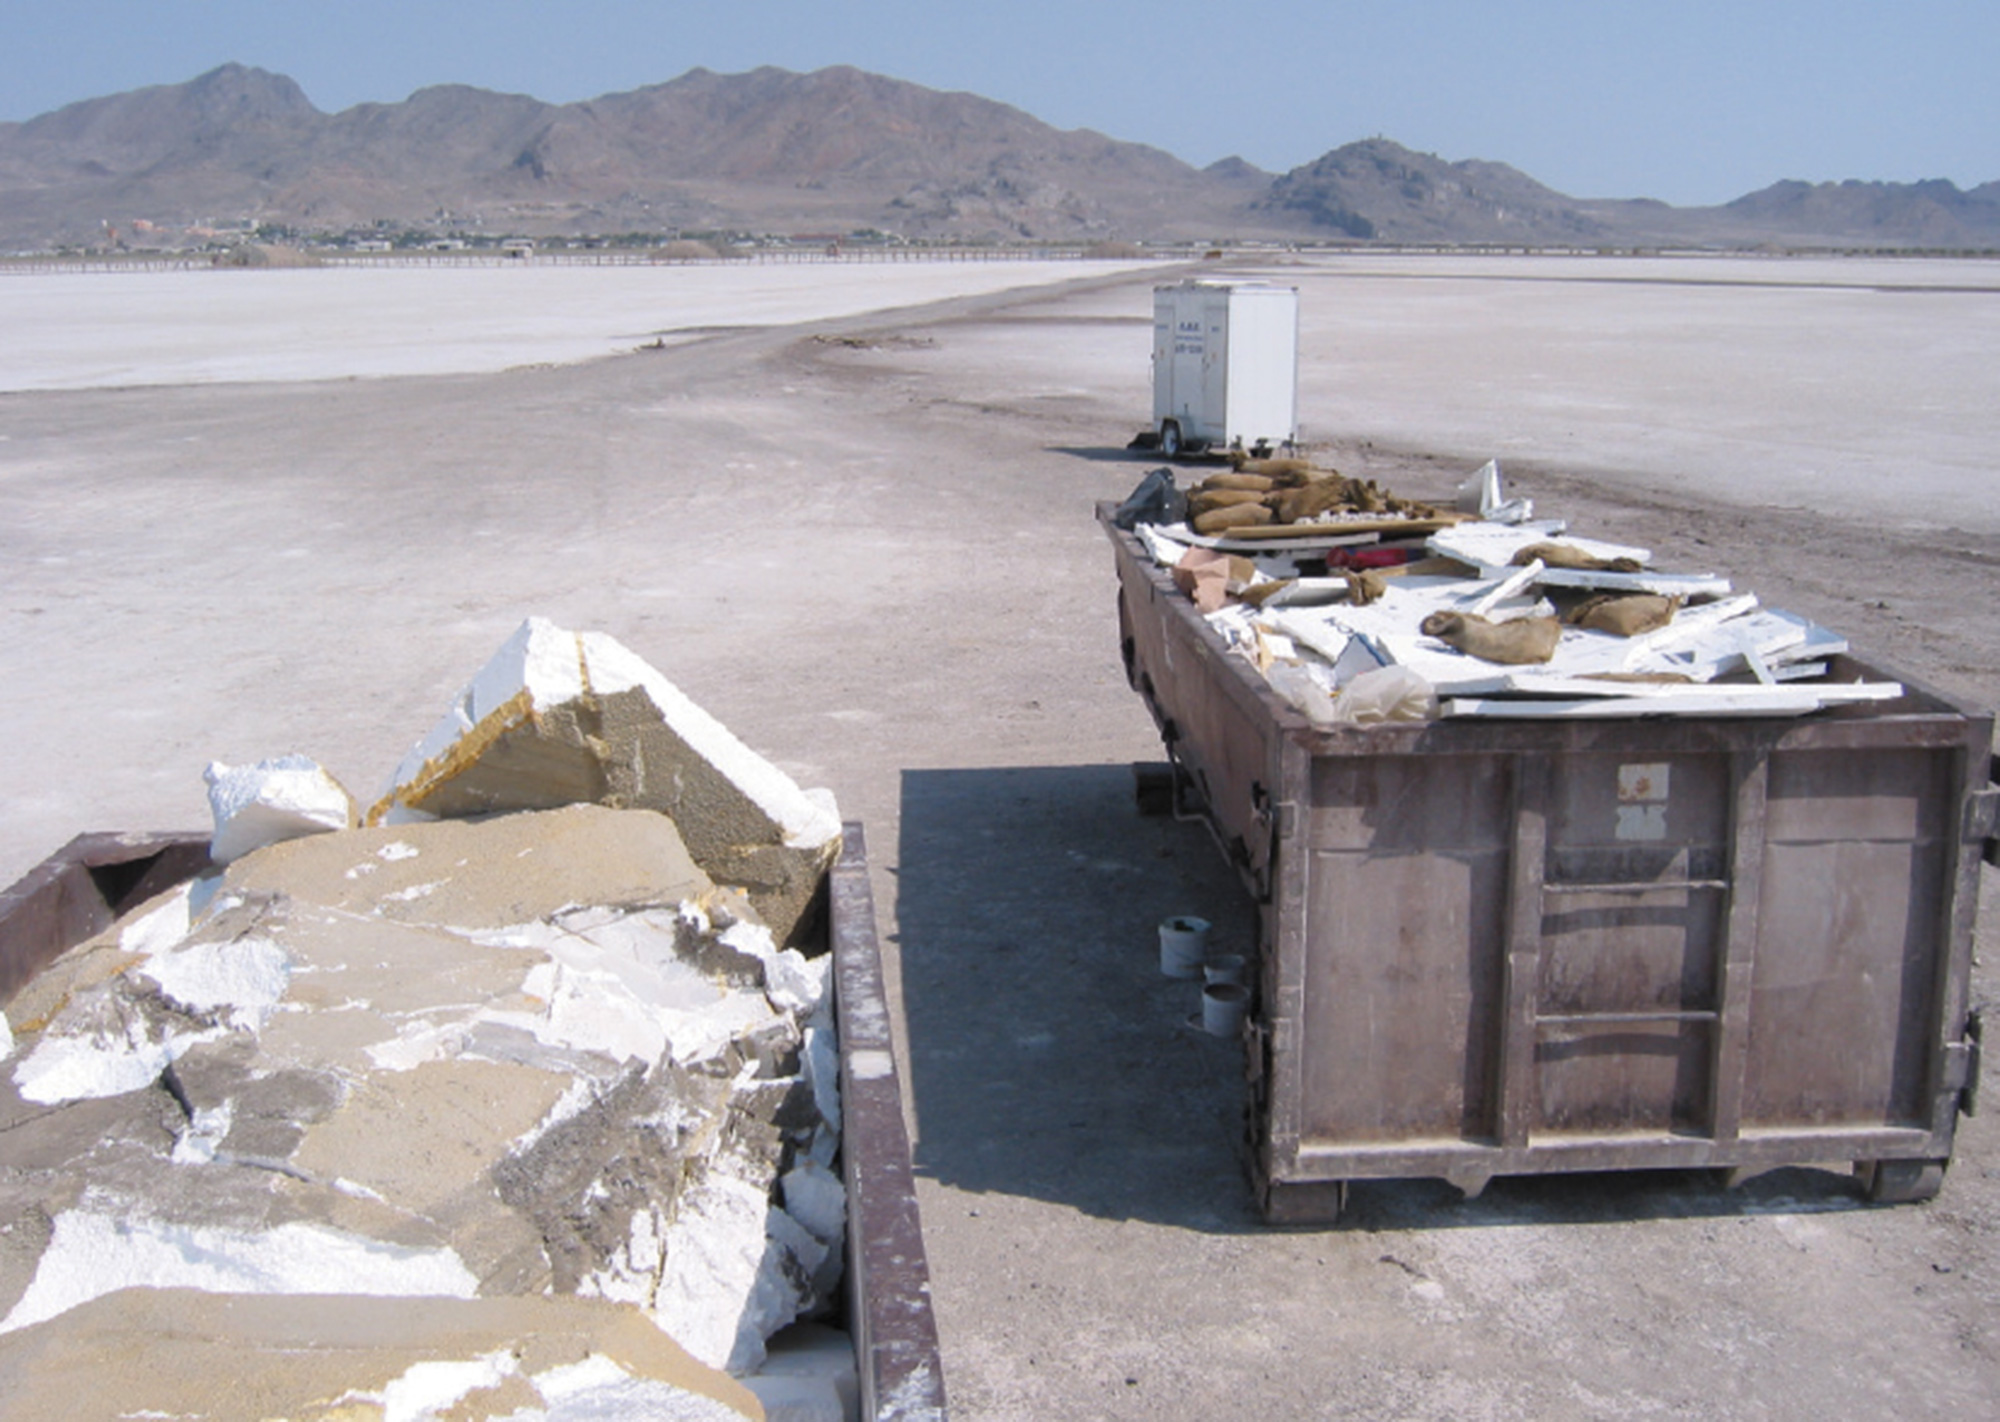 A photograph of “The Hulk” film set props in dumpsters.